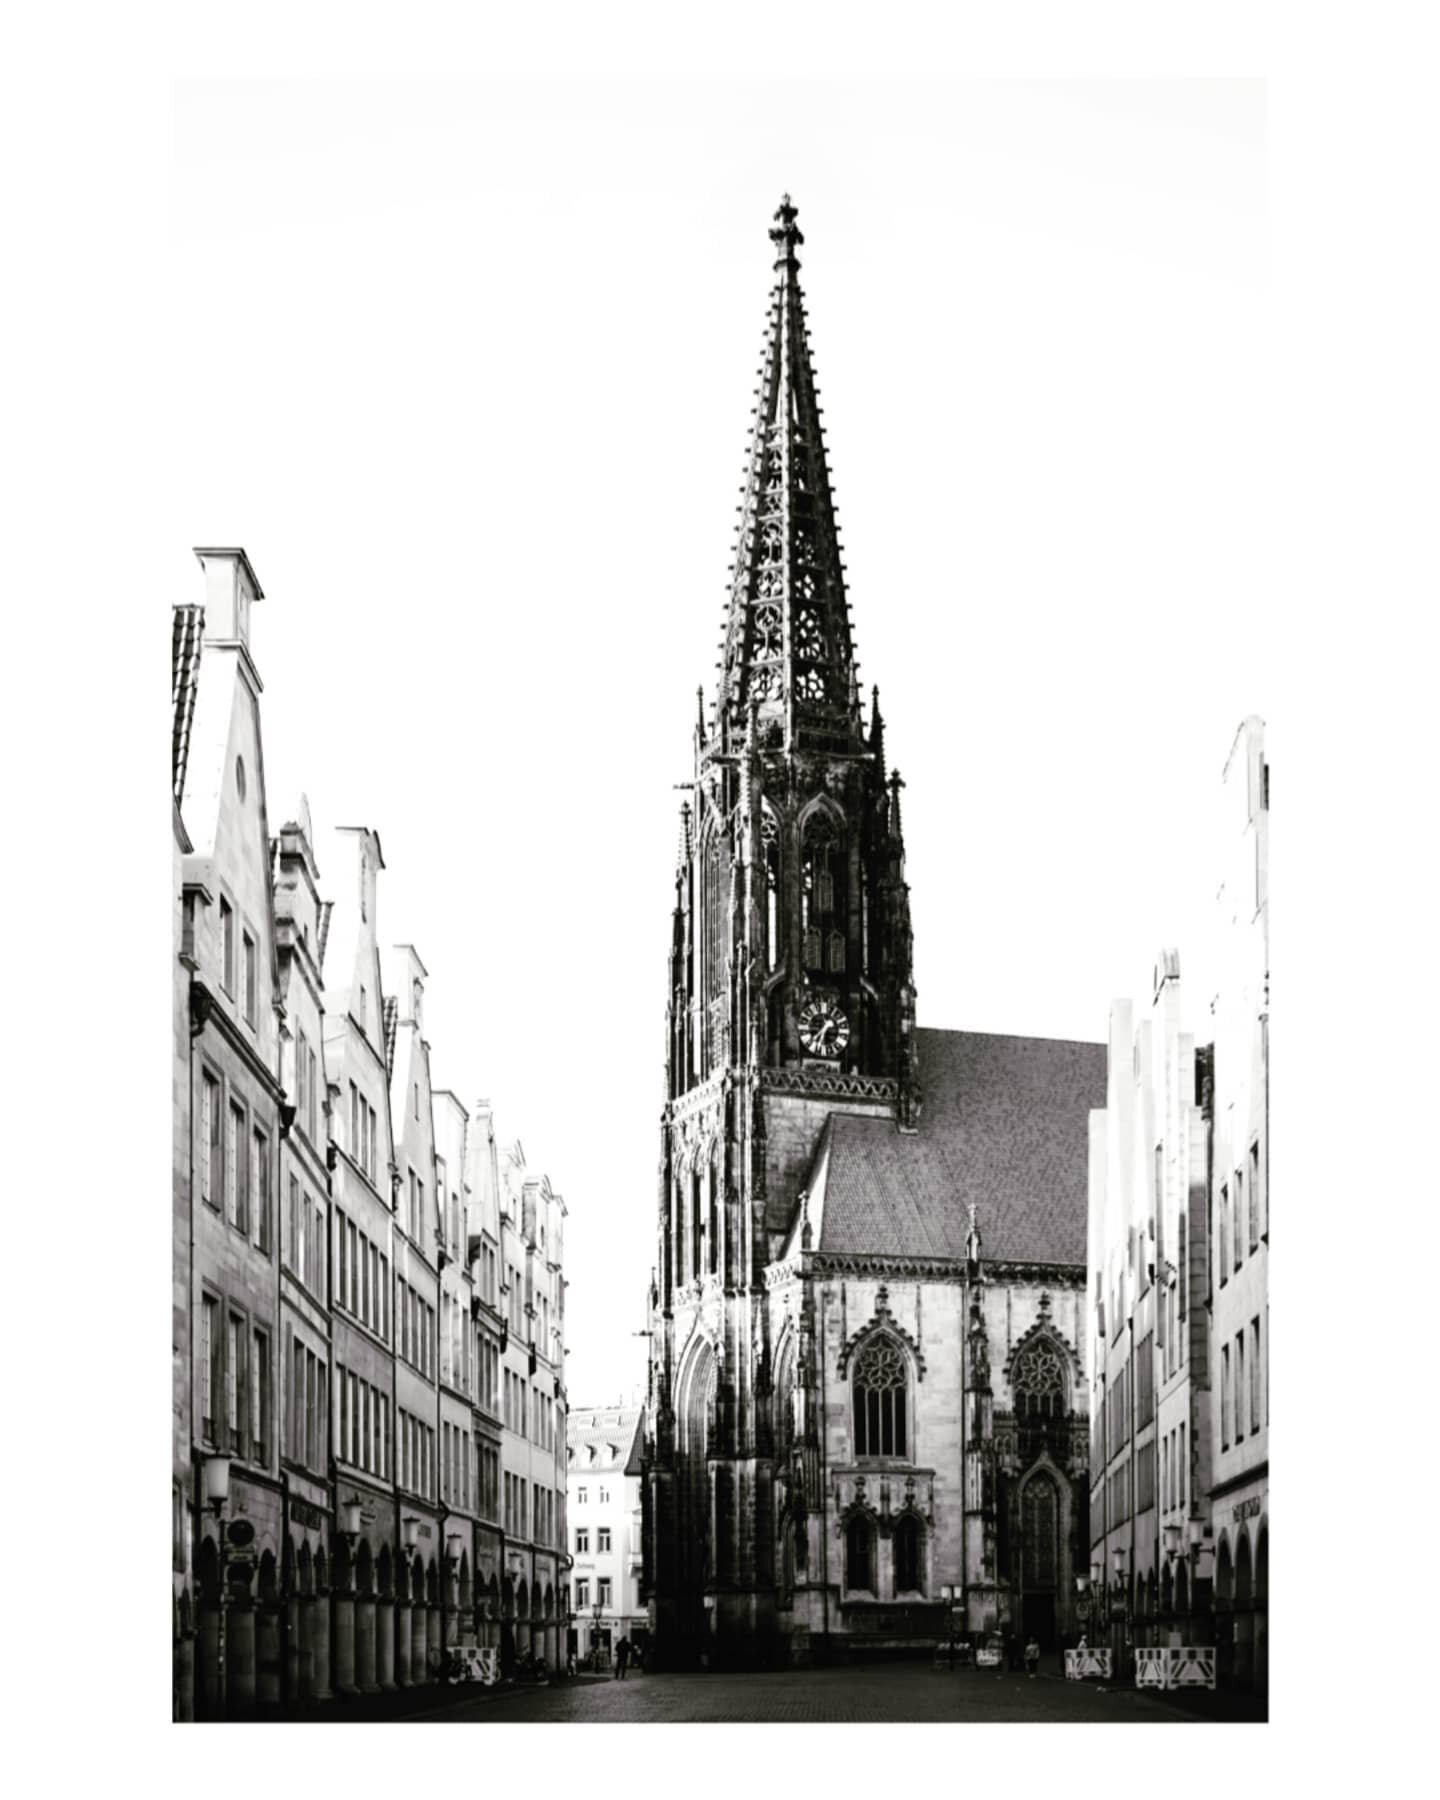 St. Lamberti, M&uuml;nster 

Prinzipalmarkt, looking towards St. Lamberti Church, in the historical city center of M&uuml;nster, Germany. This Gothic landmark was built from 1375 to 1450, although the bell tower had to be completely rebuilt from 1871